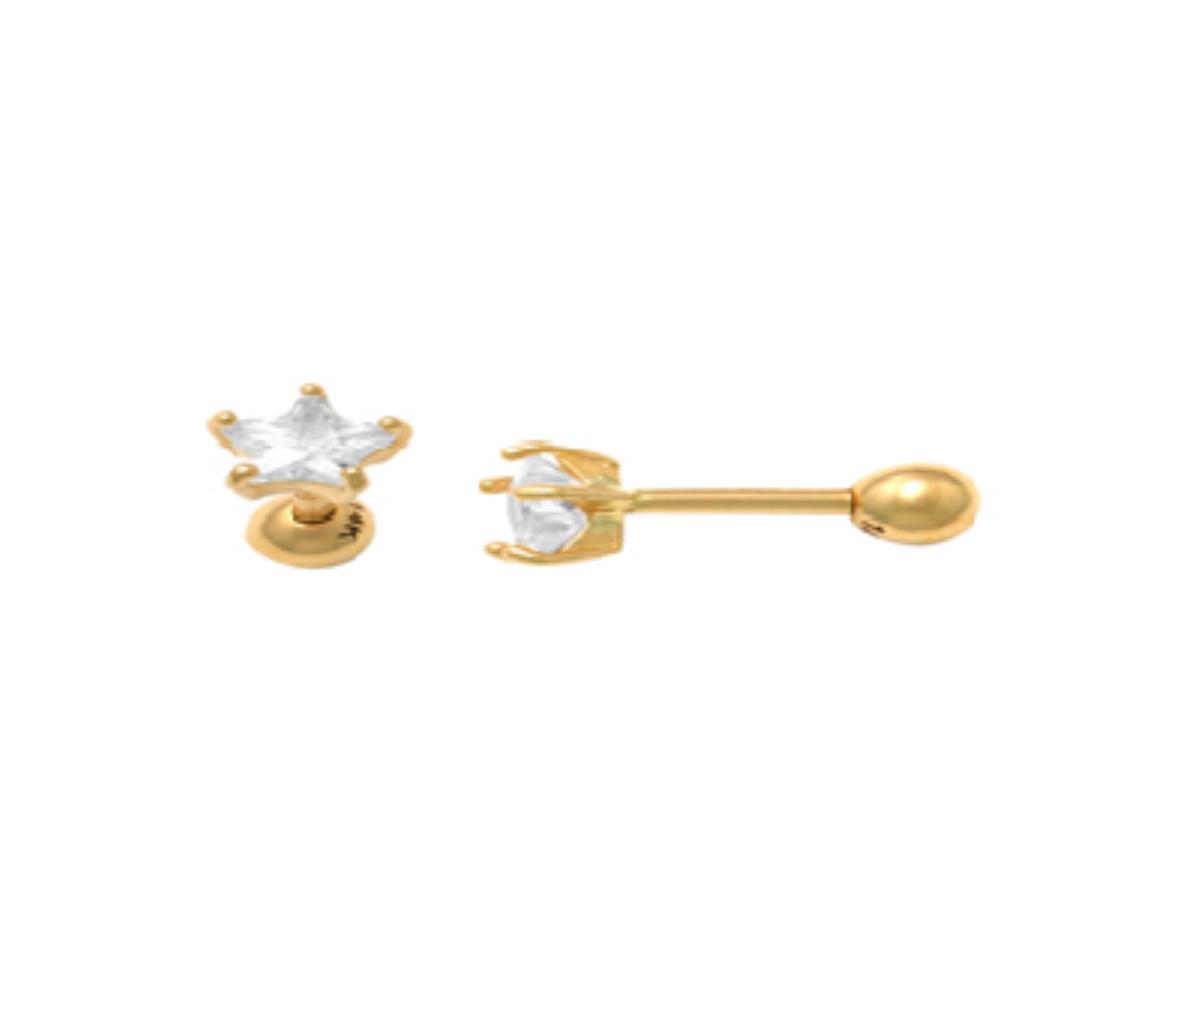 10K Yellow Gold 4mm Star Cut Solitaire Ear/Nose Stud with Ball Screw-Back